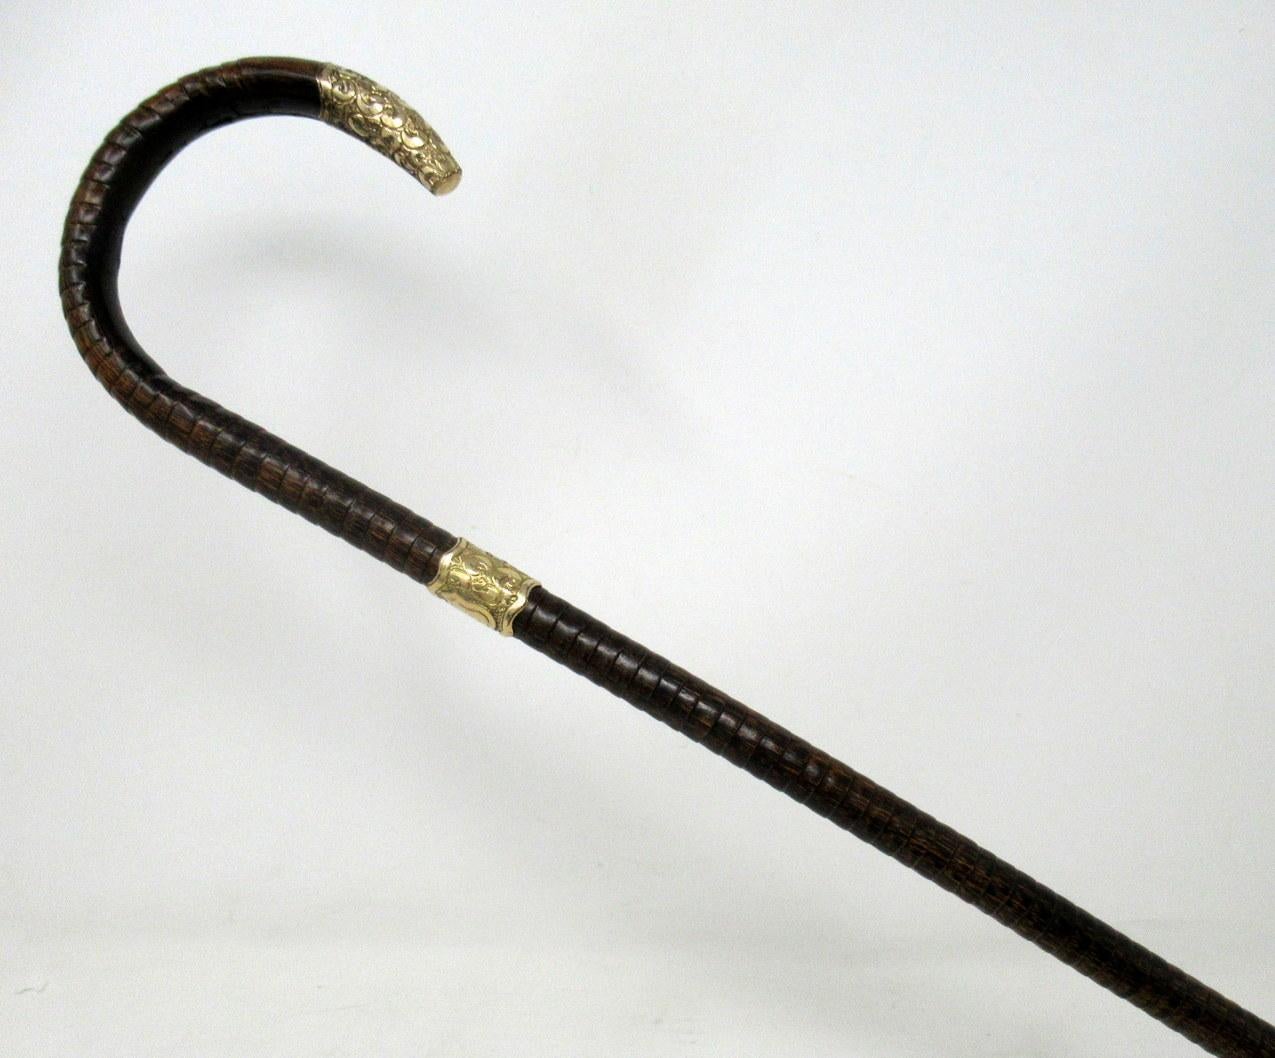 Embossed Antique Vintage Partridge Wood Wooden Walking Stick 18ct Gold-Plated Grip Collar